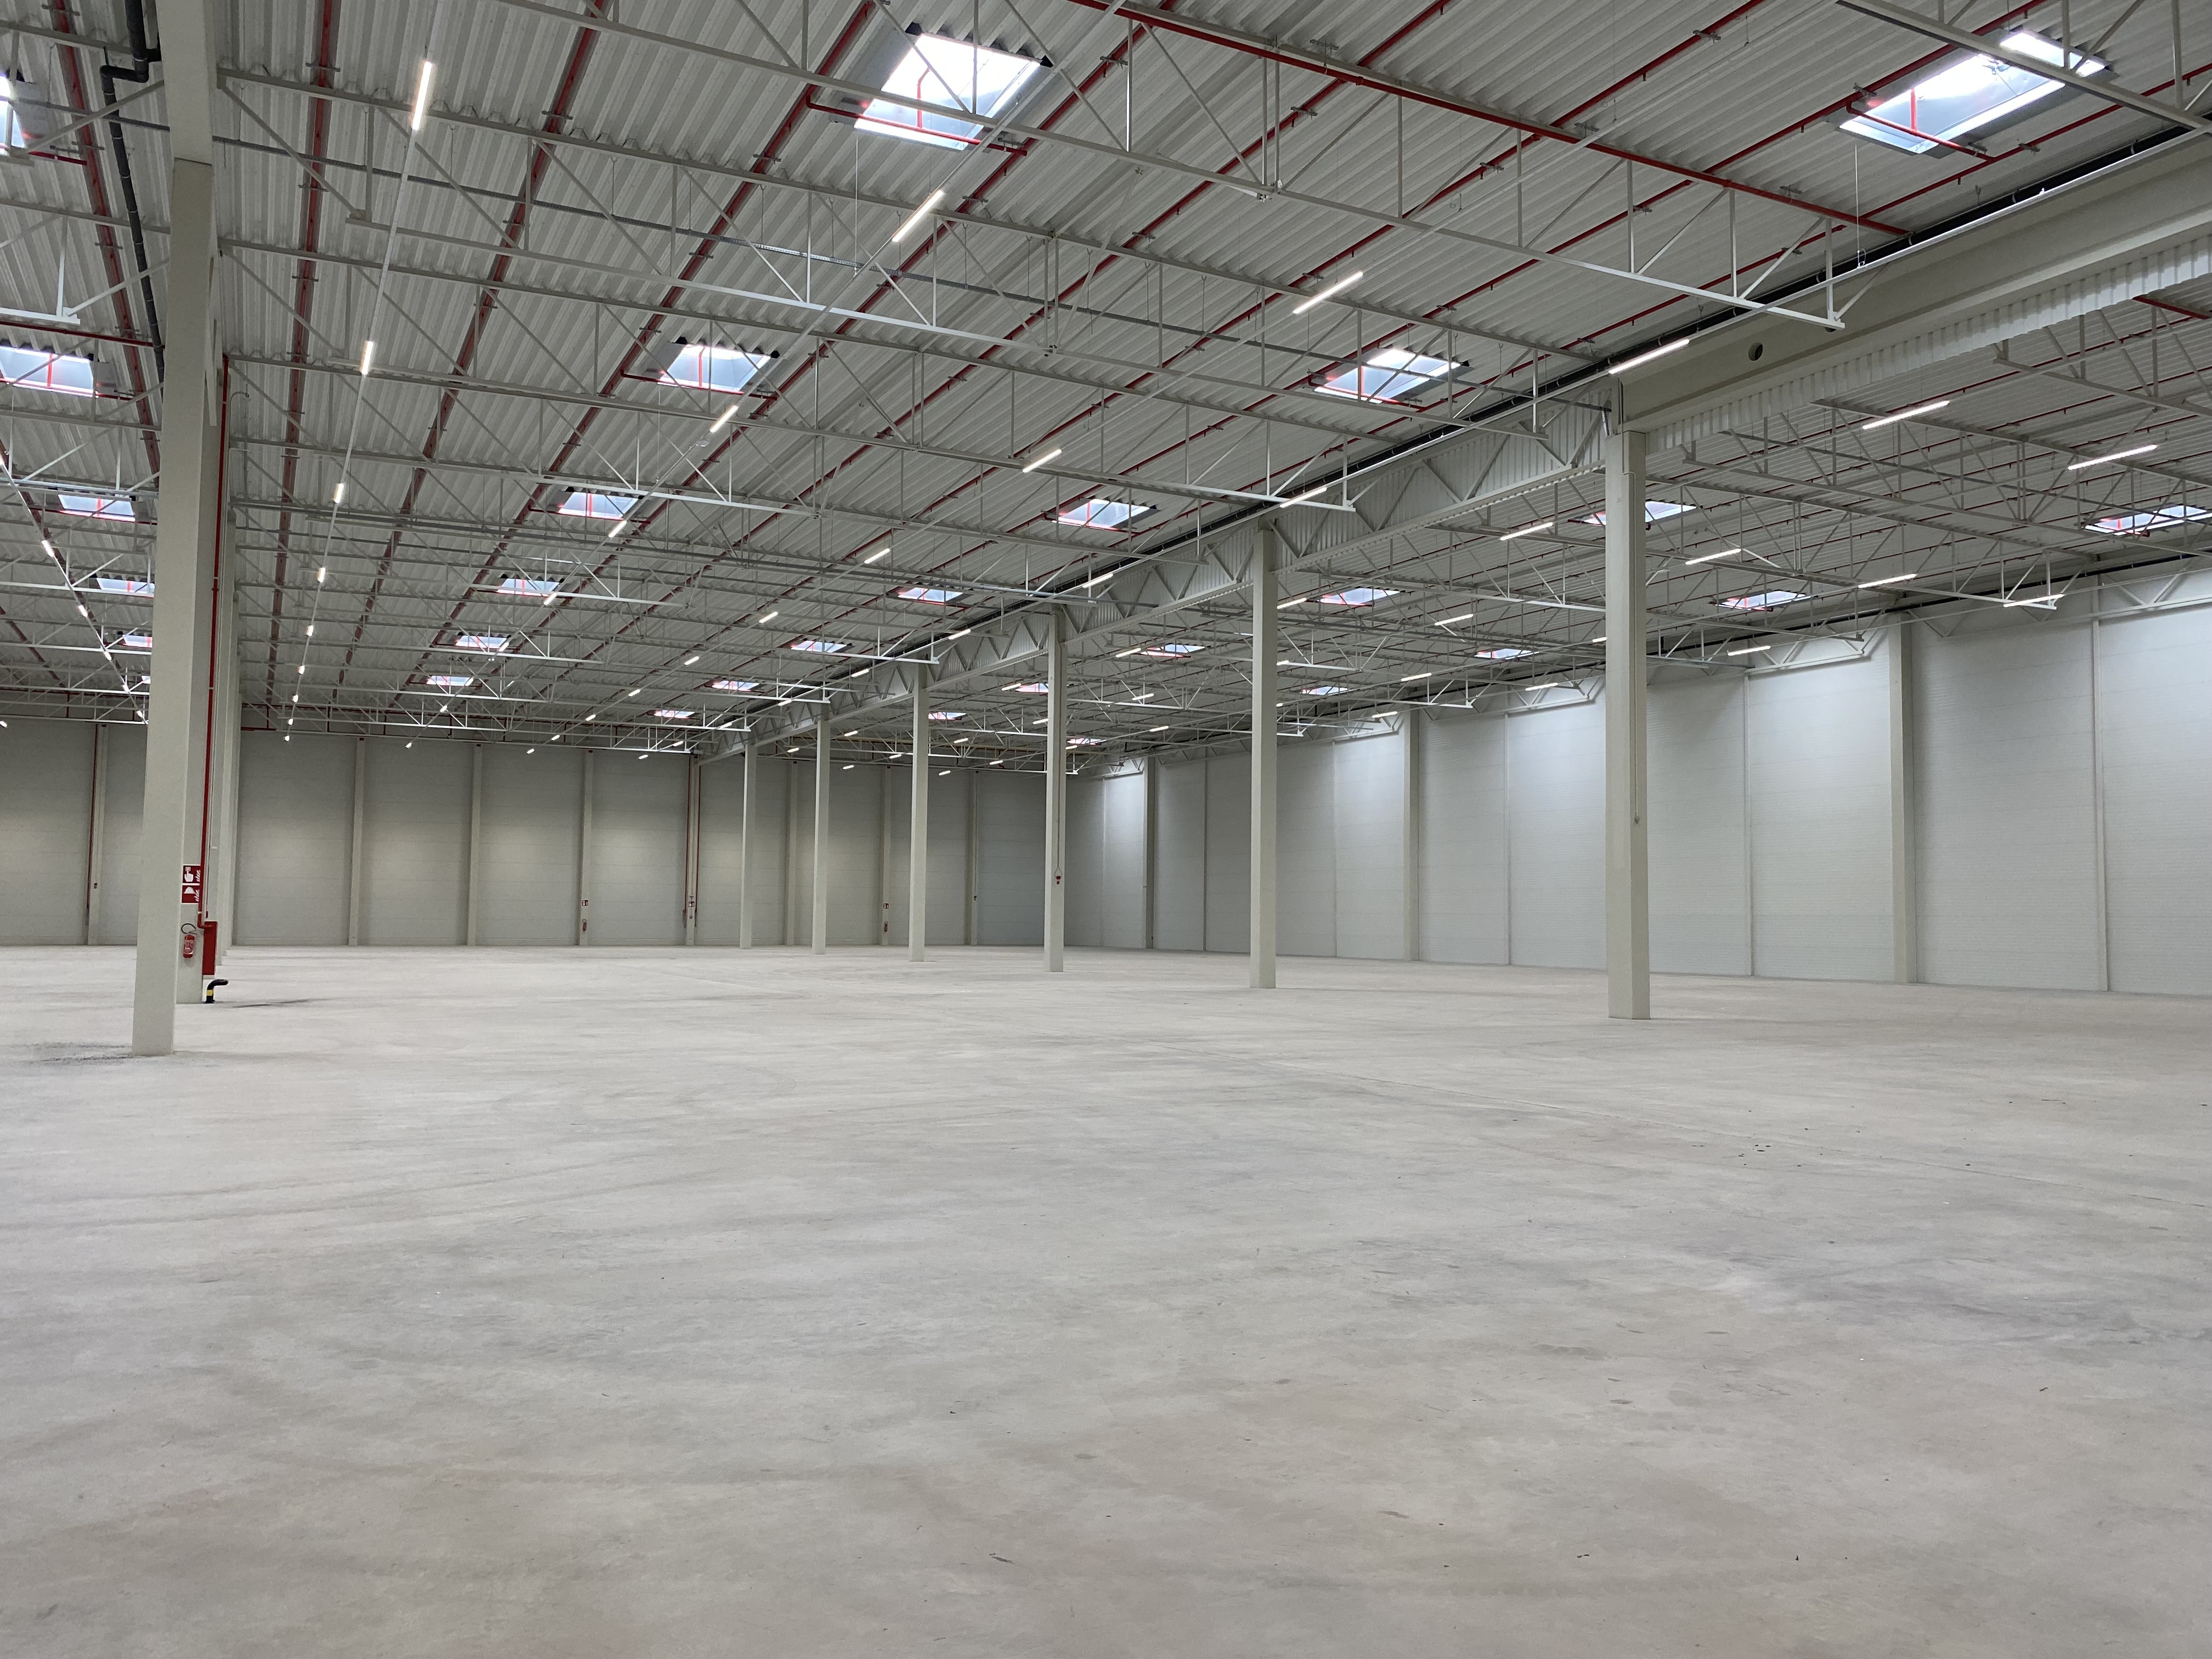 Interior of empty warehouse with poles